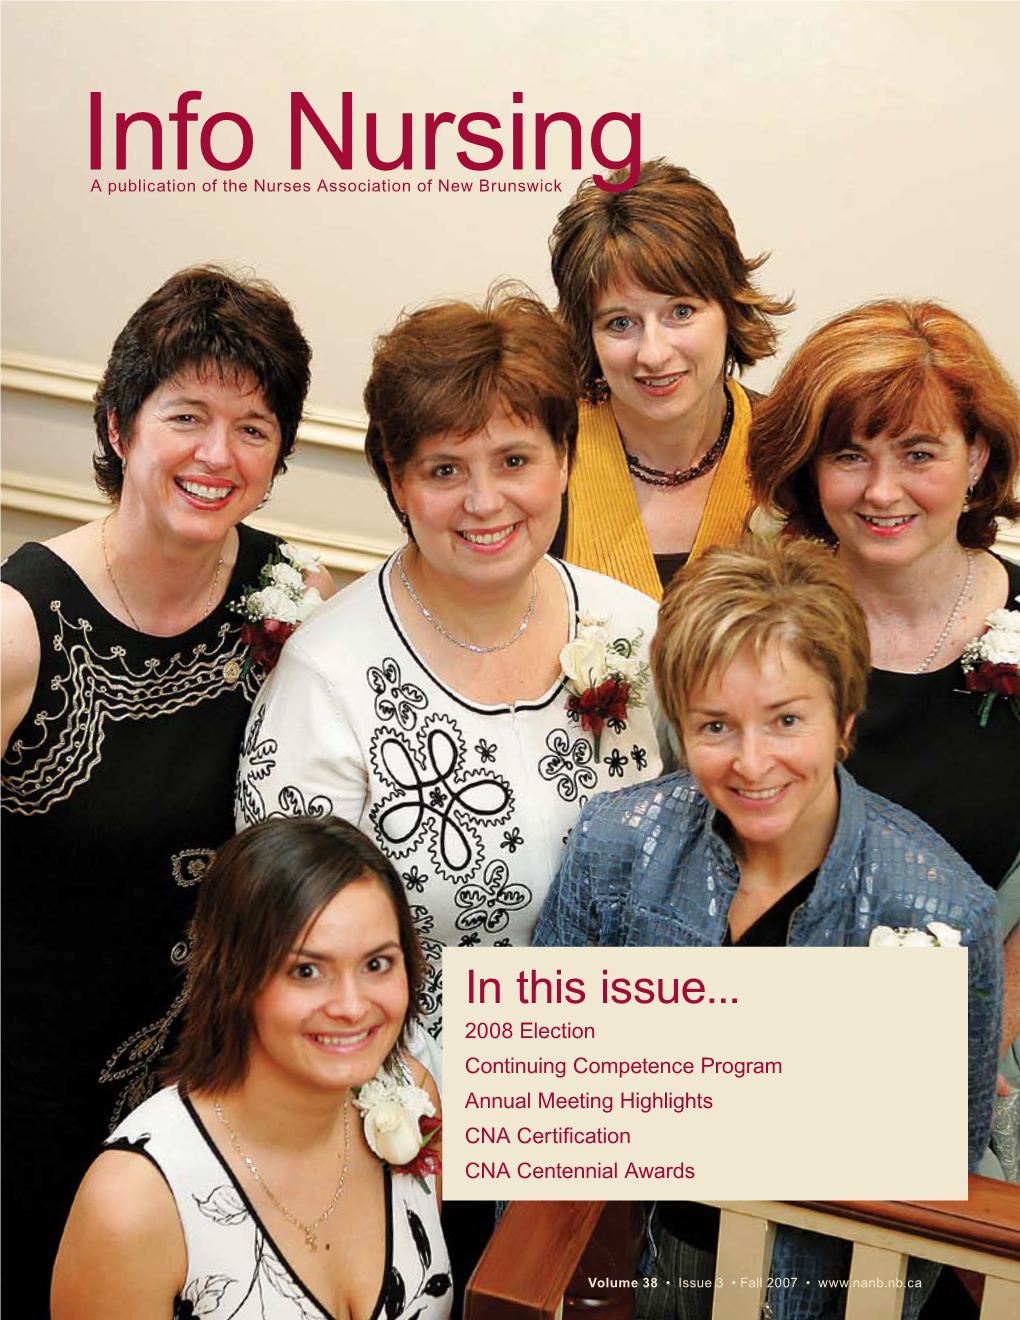 Info Nursing Is Published Four Times a Year by the Nurses Association of New Brunswick, 165 Regent St., Fredericton, NB, E3B 7B4